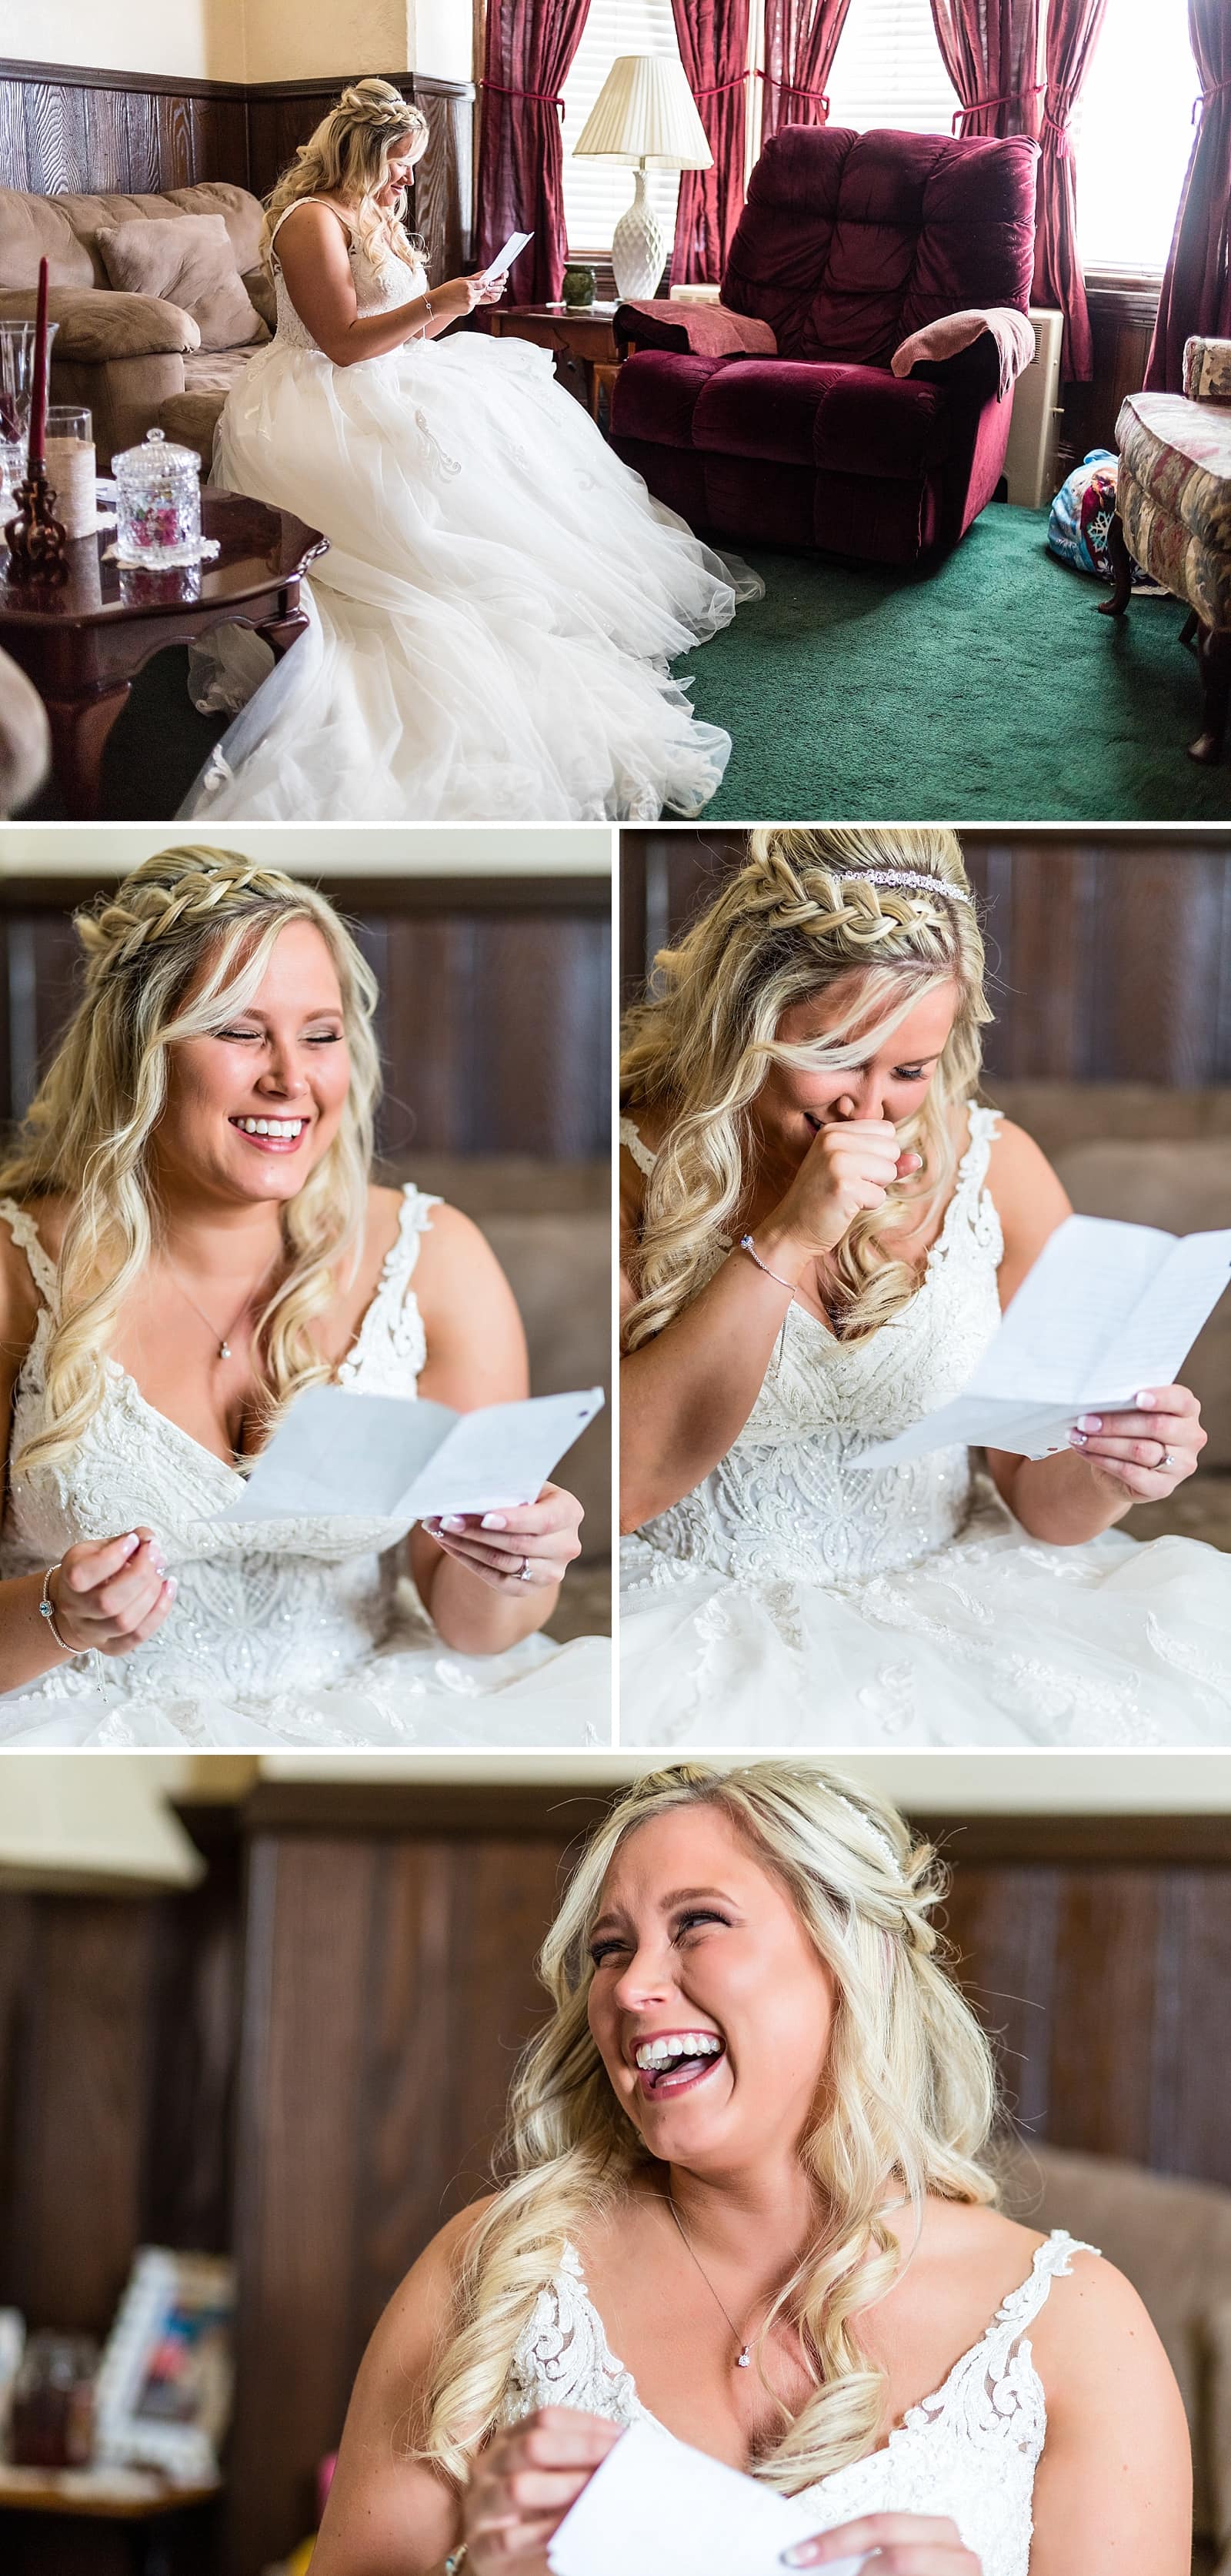 Bride alternating between tears and laughter as she reads a poem written by her groom